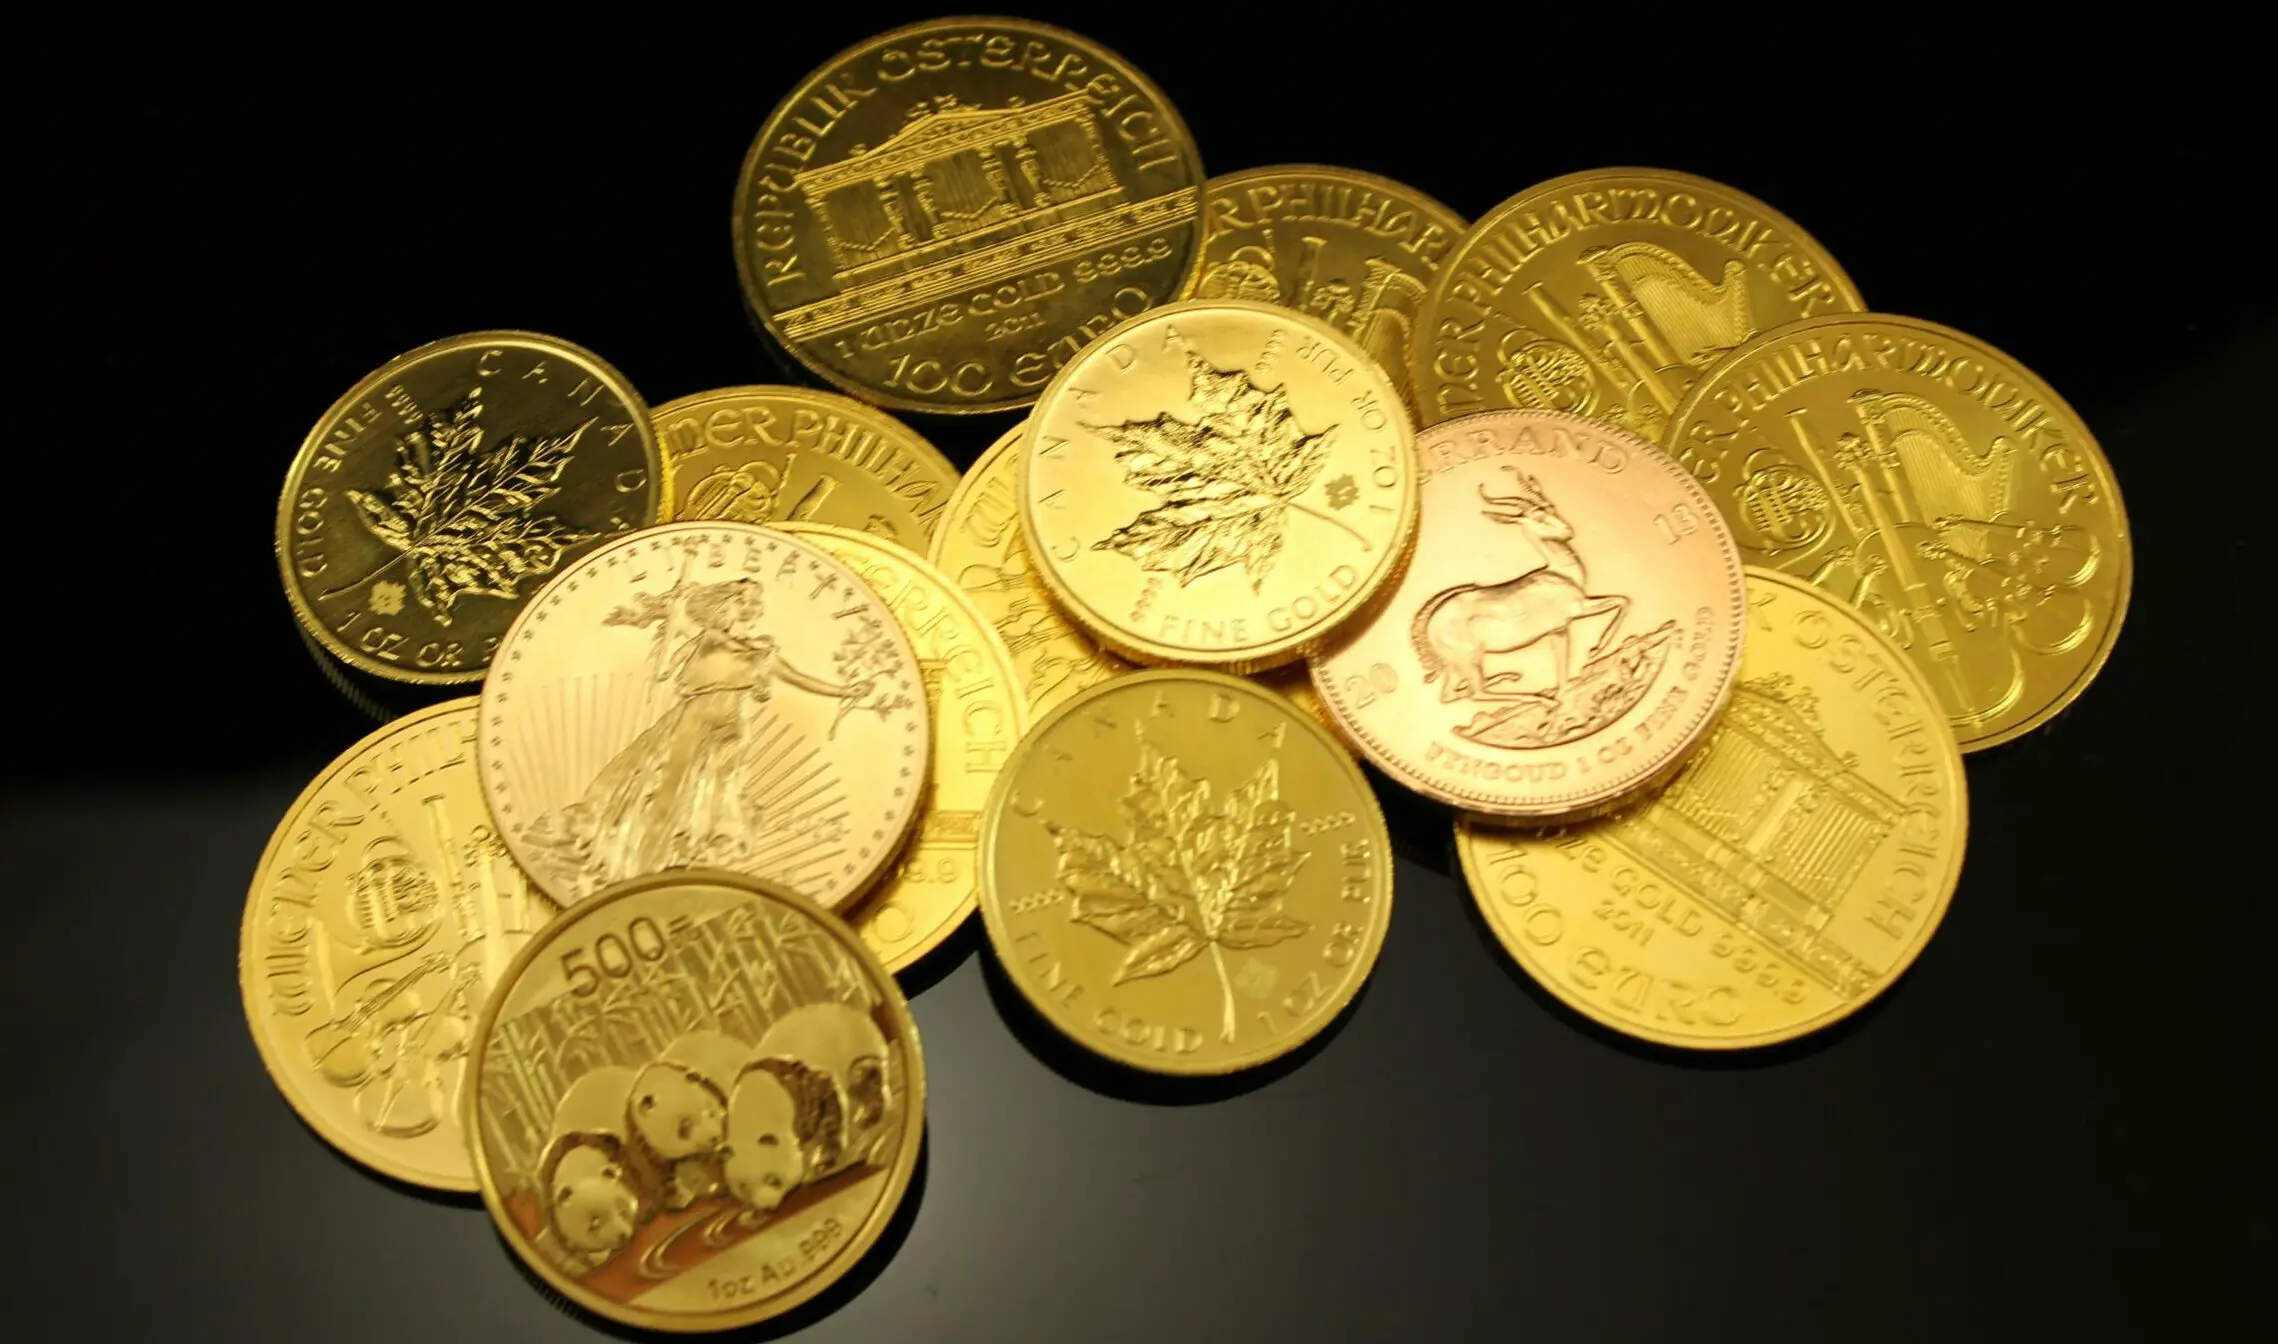 Will gold coins melt in a house fire?